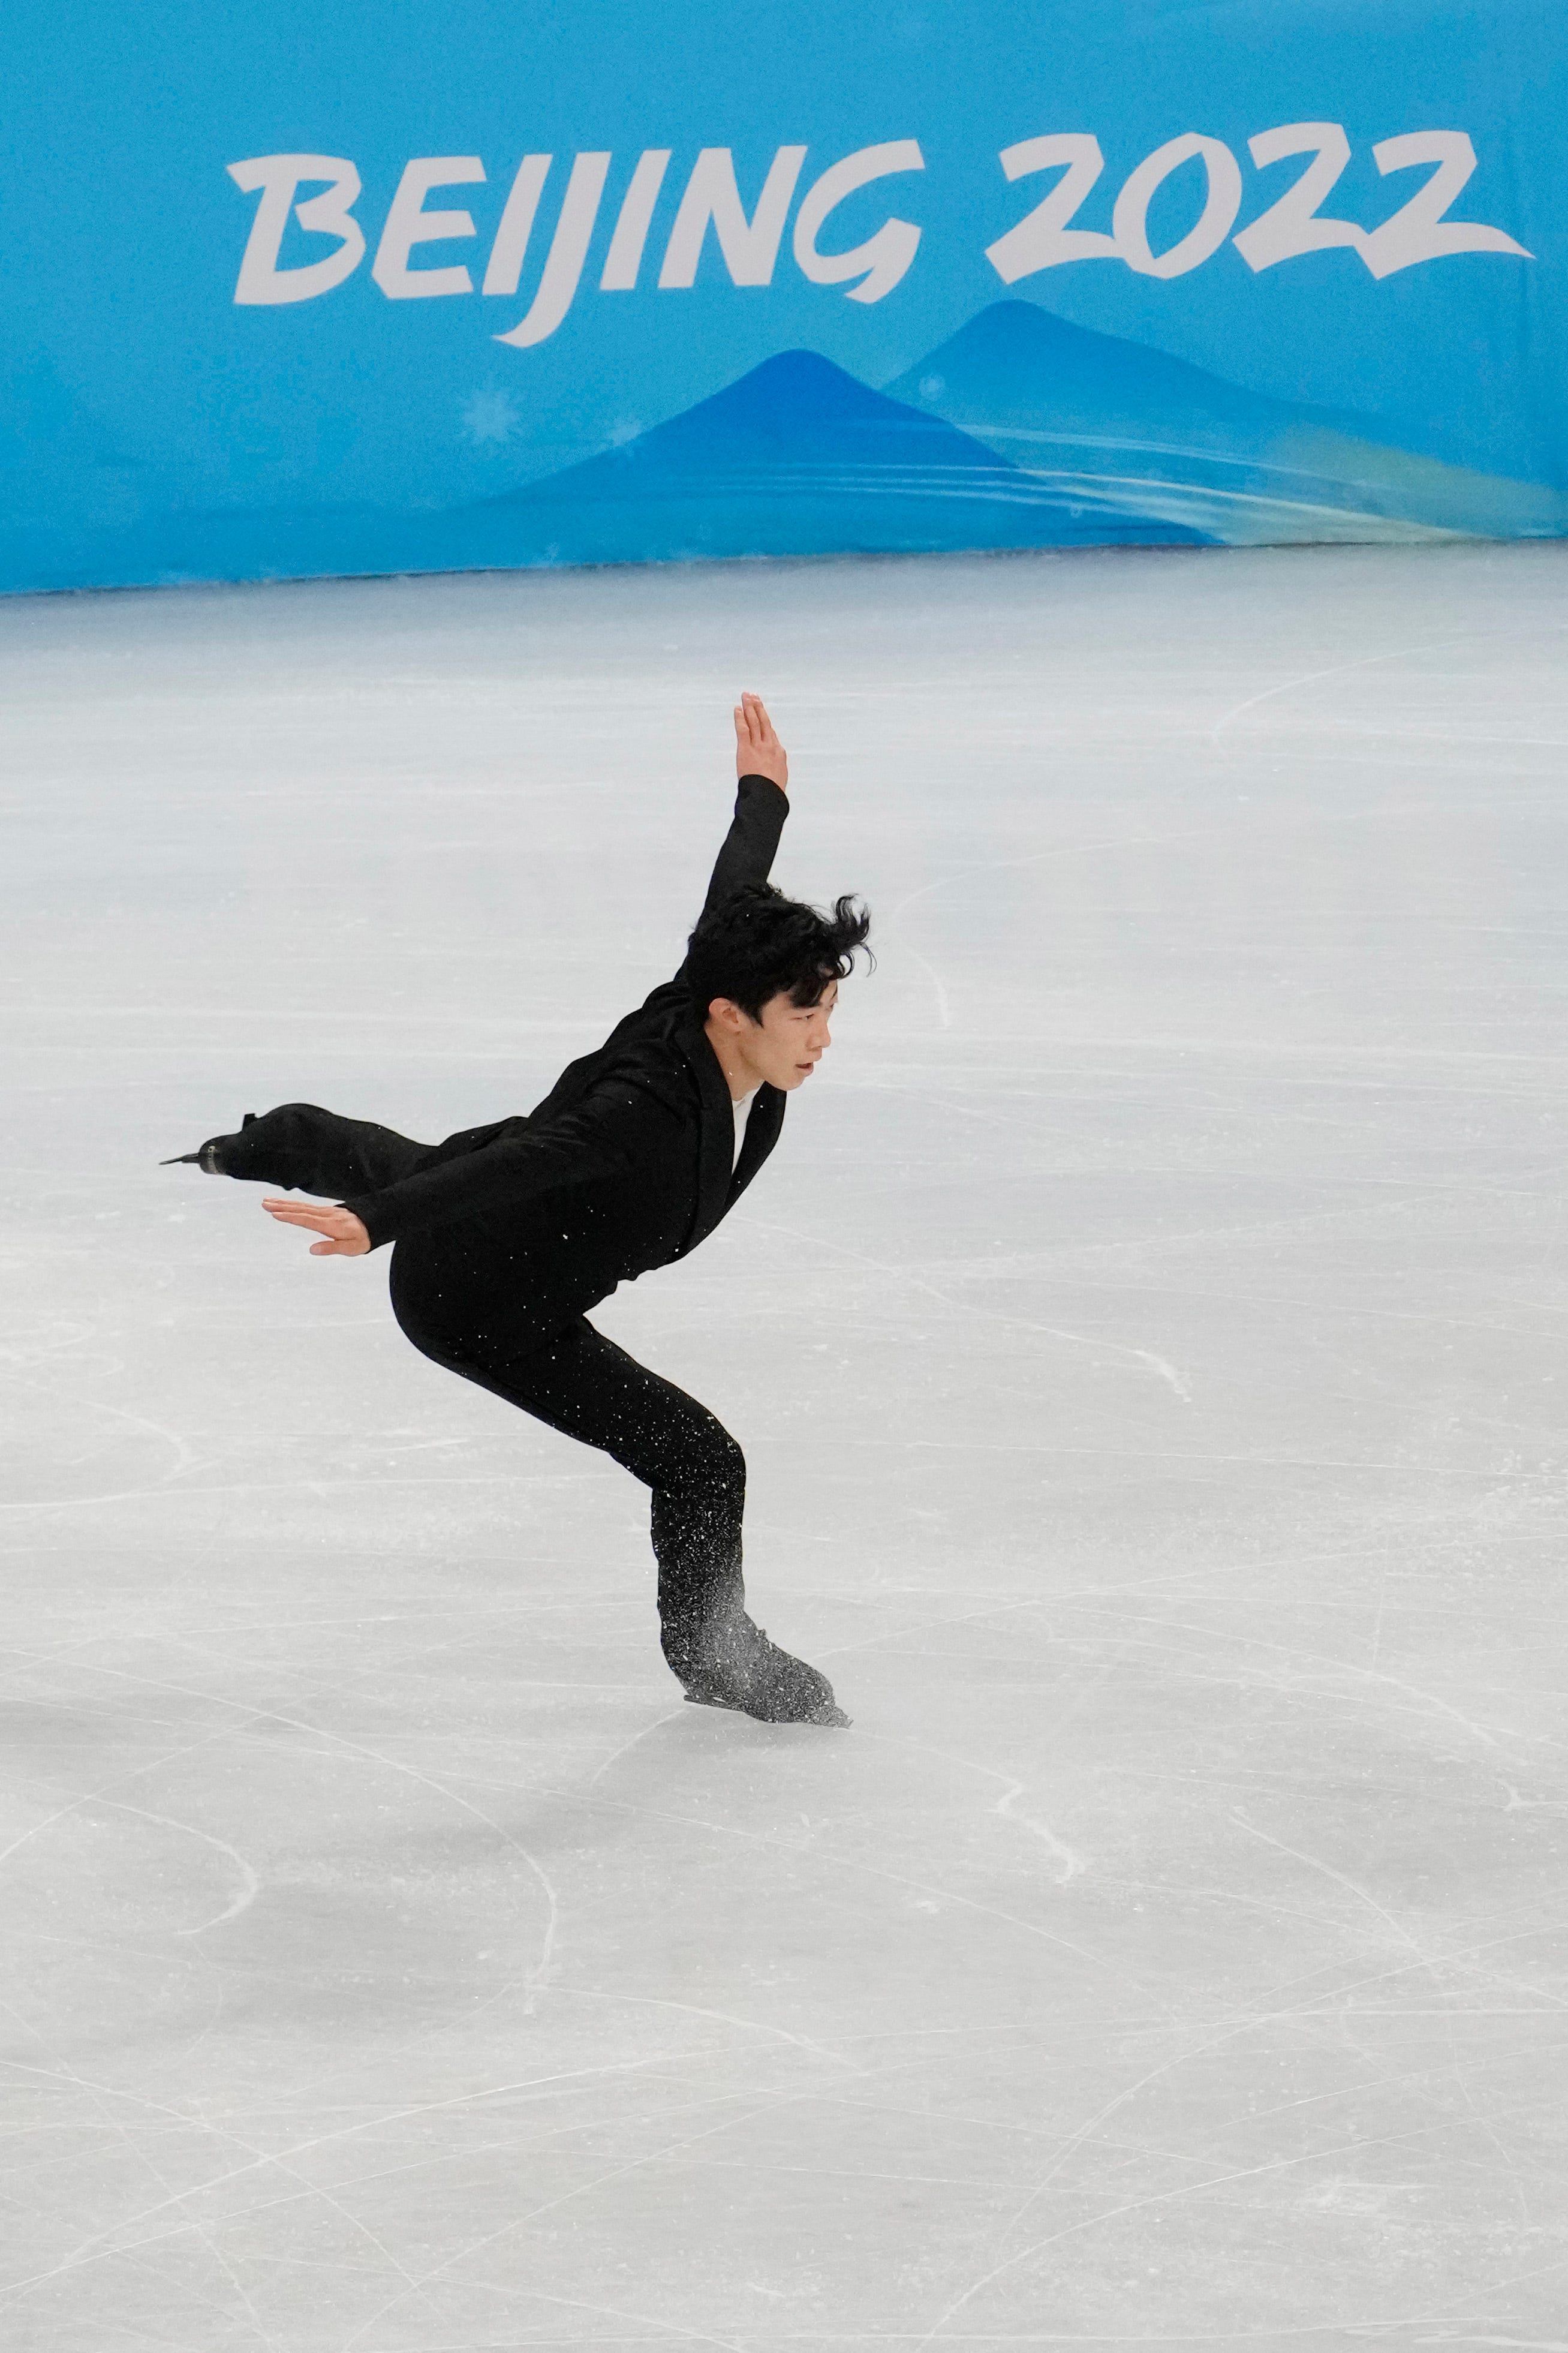 Olympics 2022 live updates Nathan Chen in front after dazzling short program; US womens hockey loses to Canada The Valley